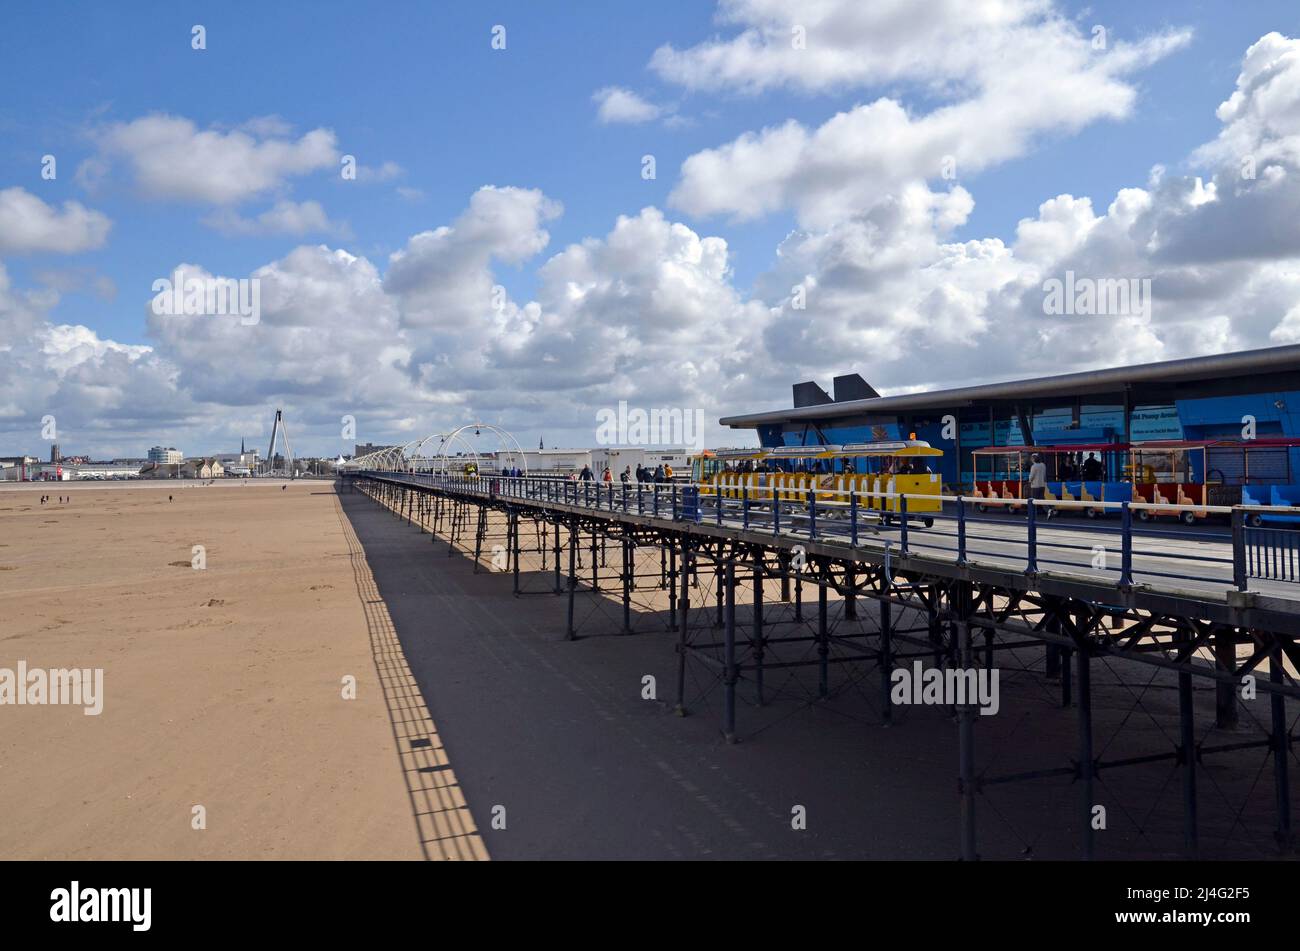 Southport Pier in Merseyside. At 1,000 metres it is the second longest in Great Britain. Stock Photo